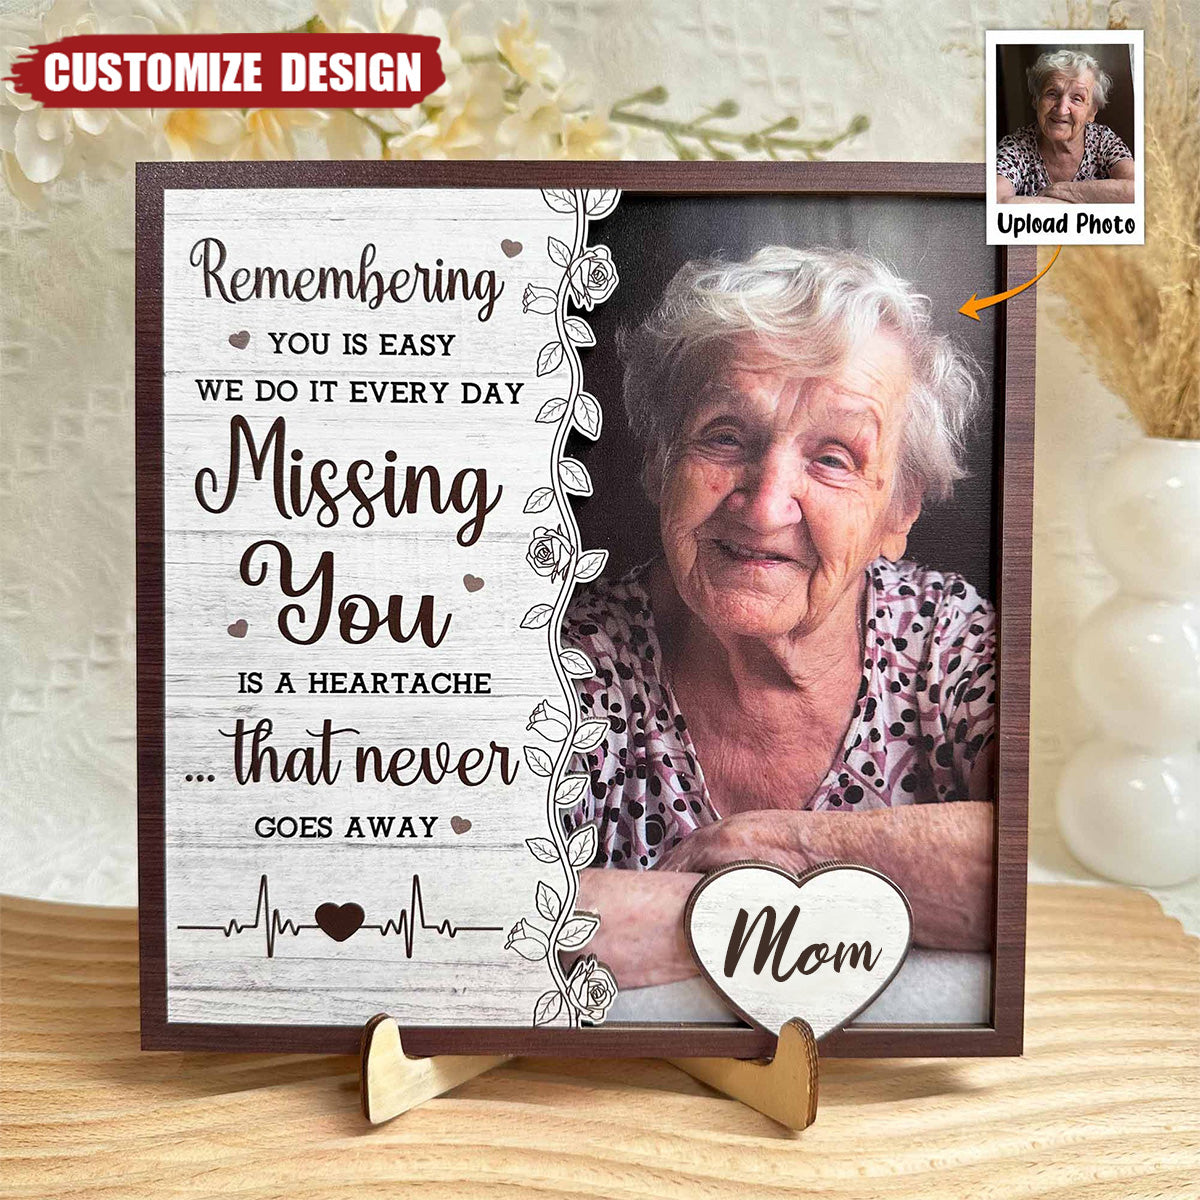 Missing You Is A Heartache - Personalized Wooden Photo Plaque